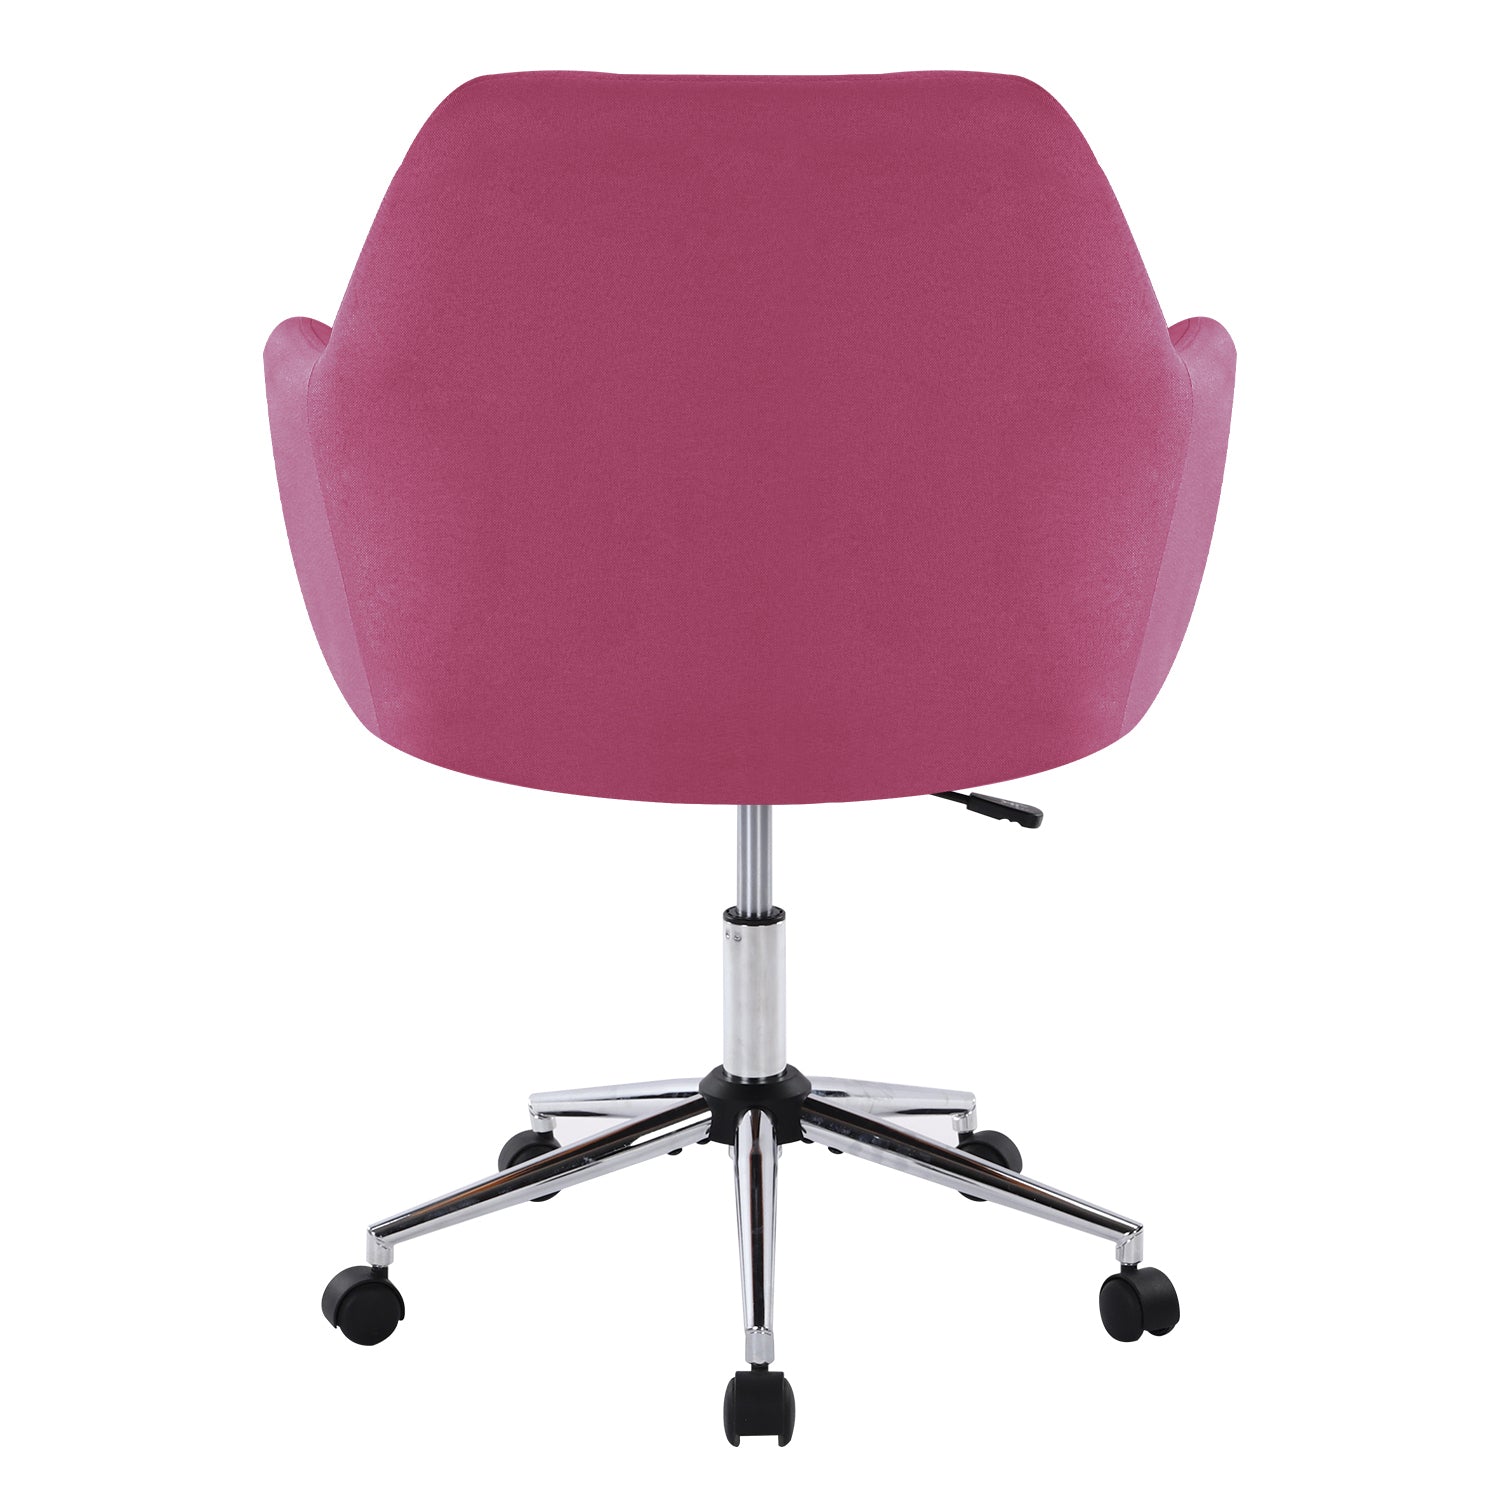 Swivel Adjustable Task Chair Executive Accent Chair with Soft Seat - Rose Red